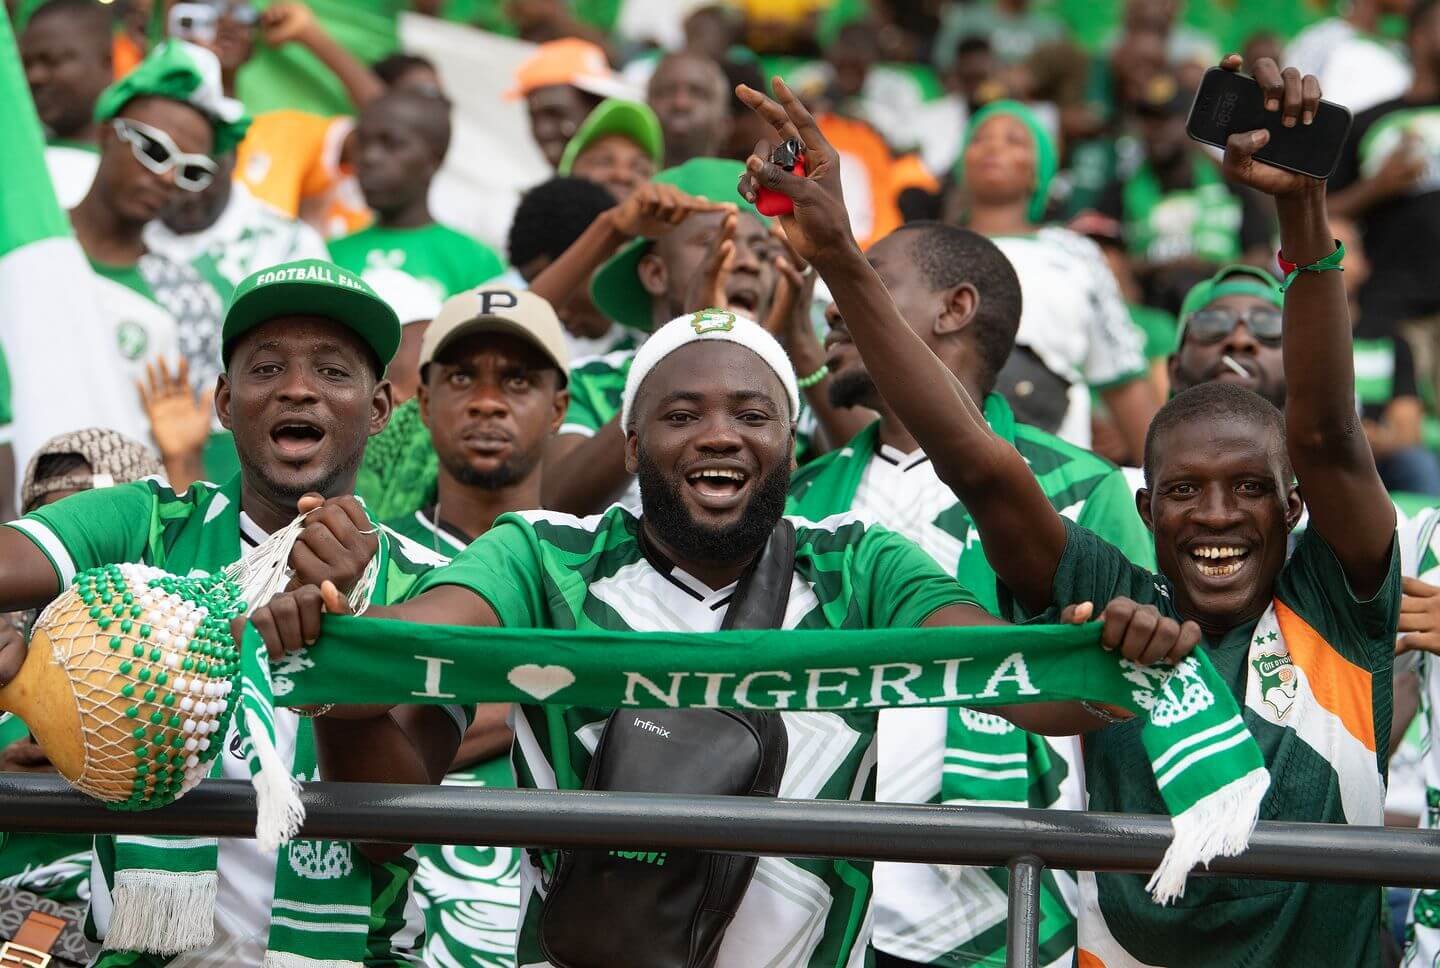 Hello and welcome to our Nigeria vs Cameroon live blog!